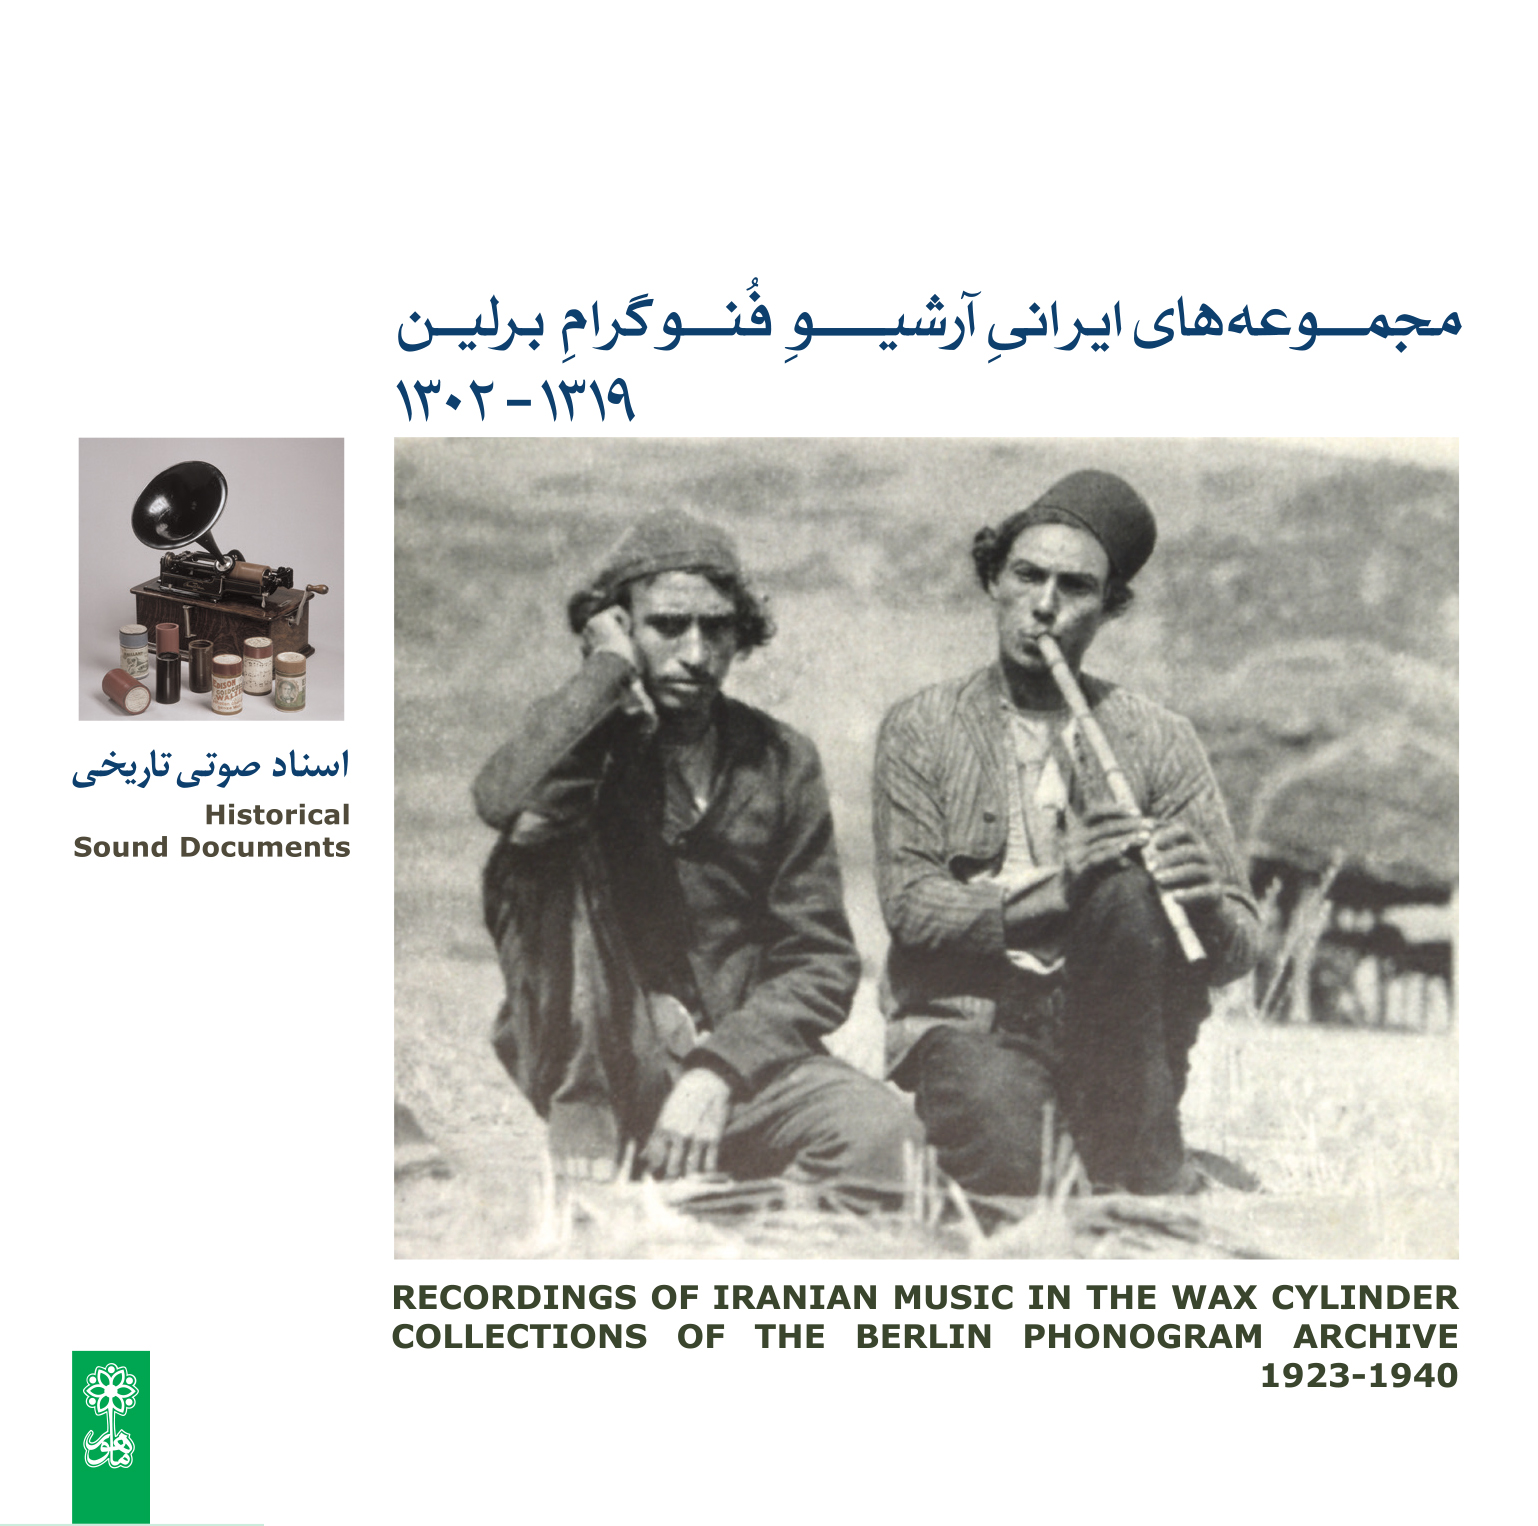 RECORDINGS OF IRANIAN MUSIC IN THE WAX CYLINDER COLLECTIONS OF THE BERLIN